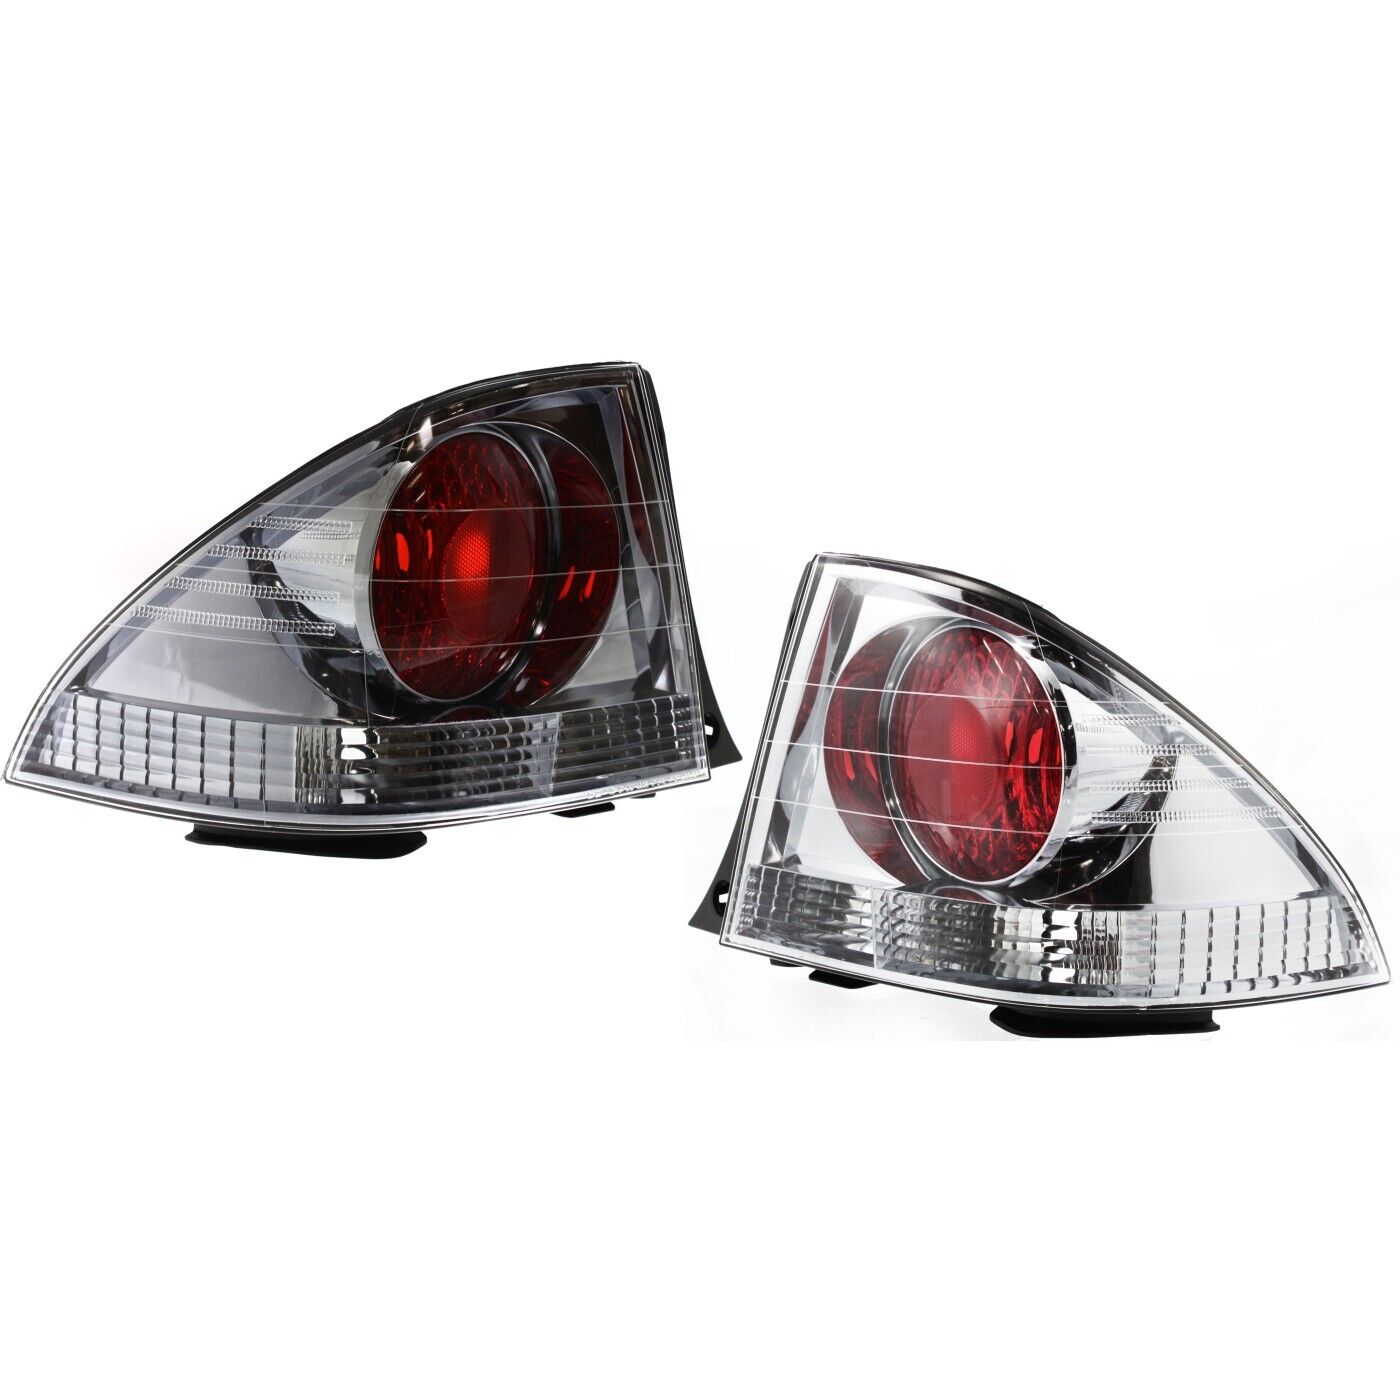 Set of 2 Tail Light For 2001 Lexus IS300 LH & RH Clear & Red Lens